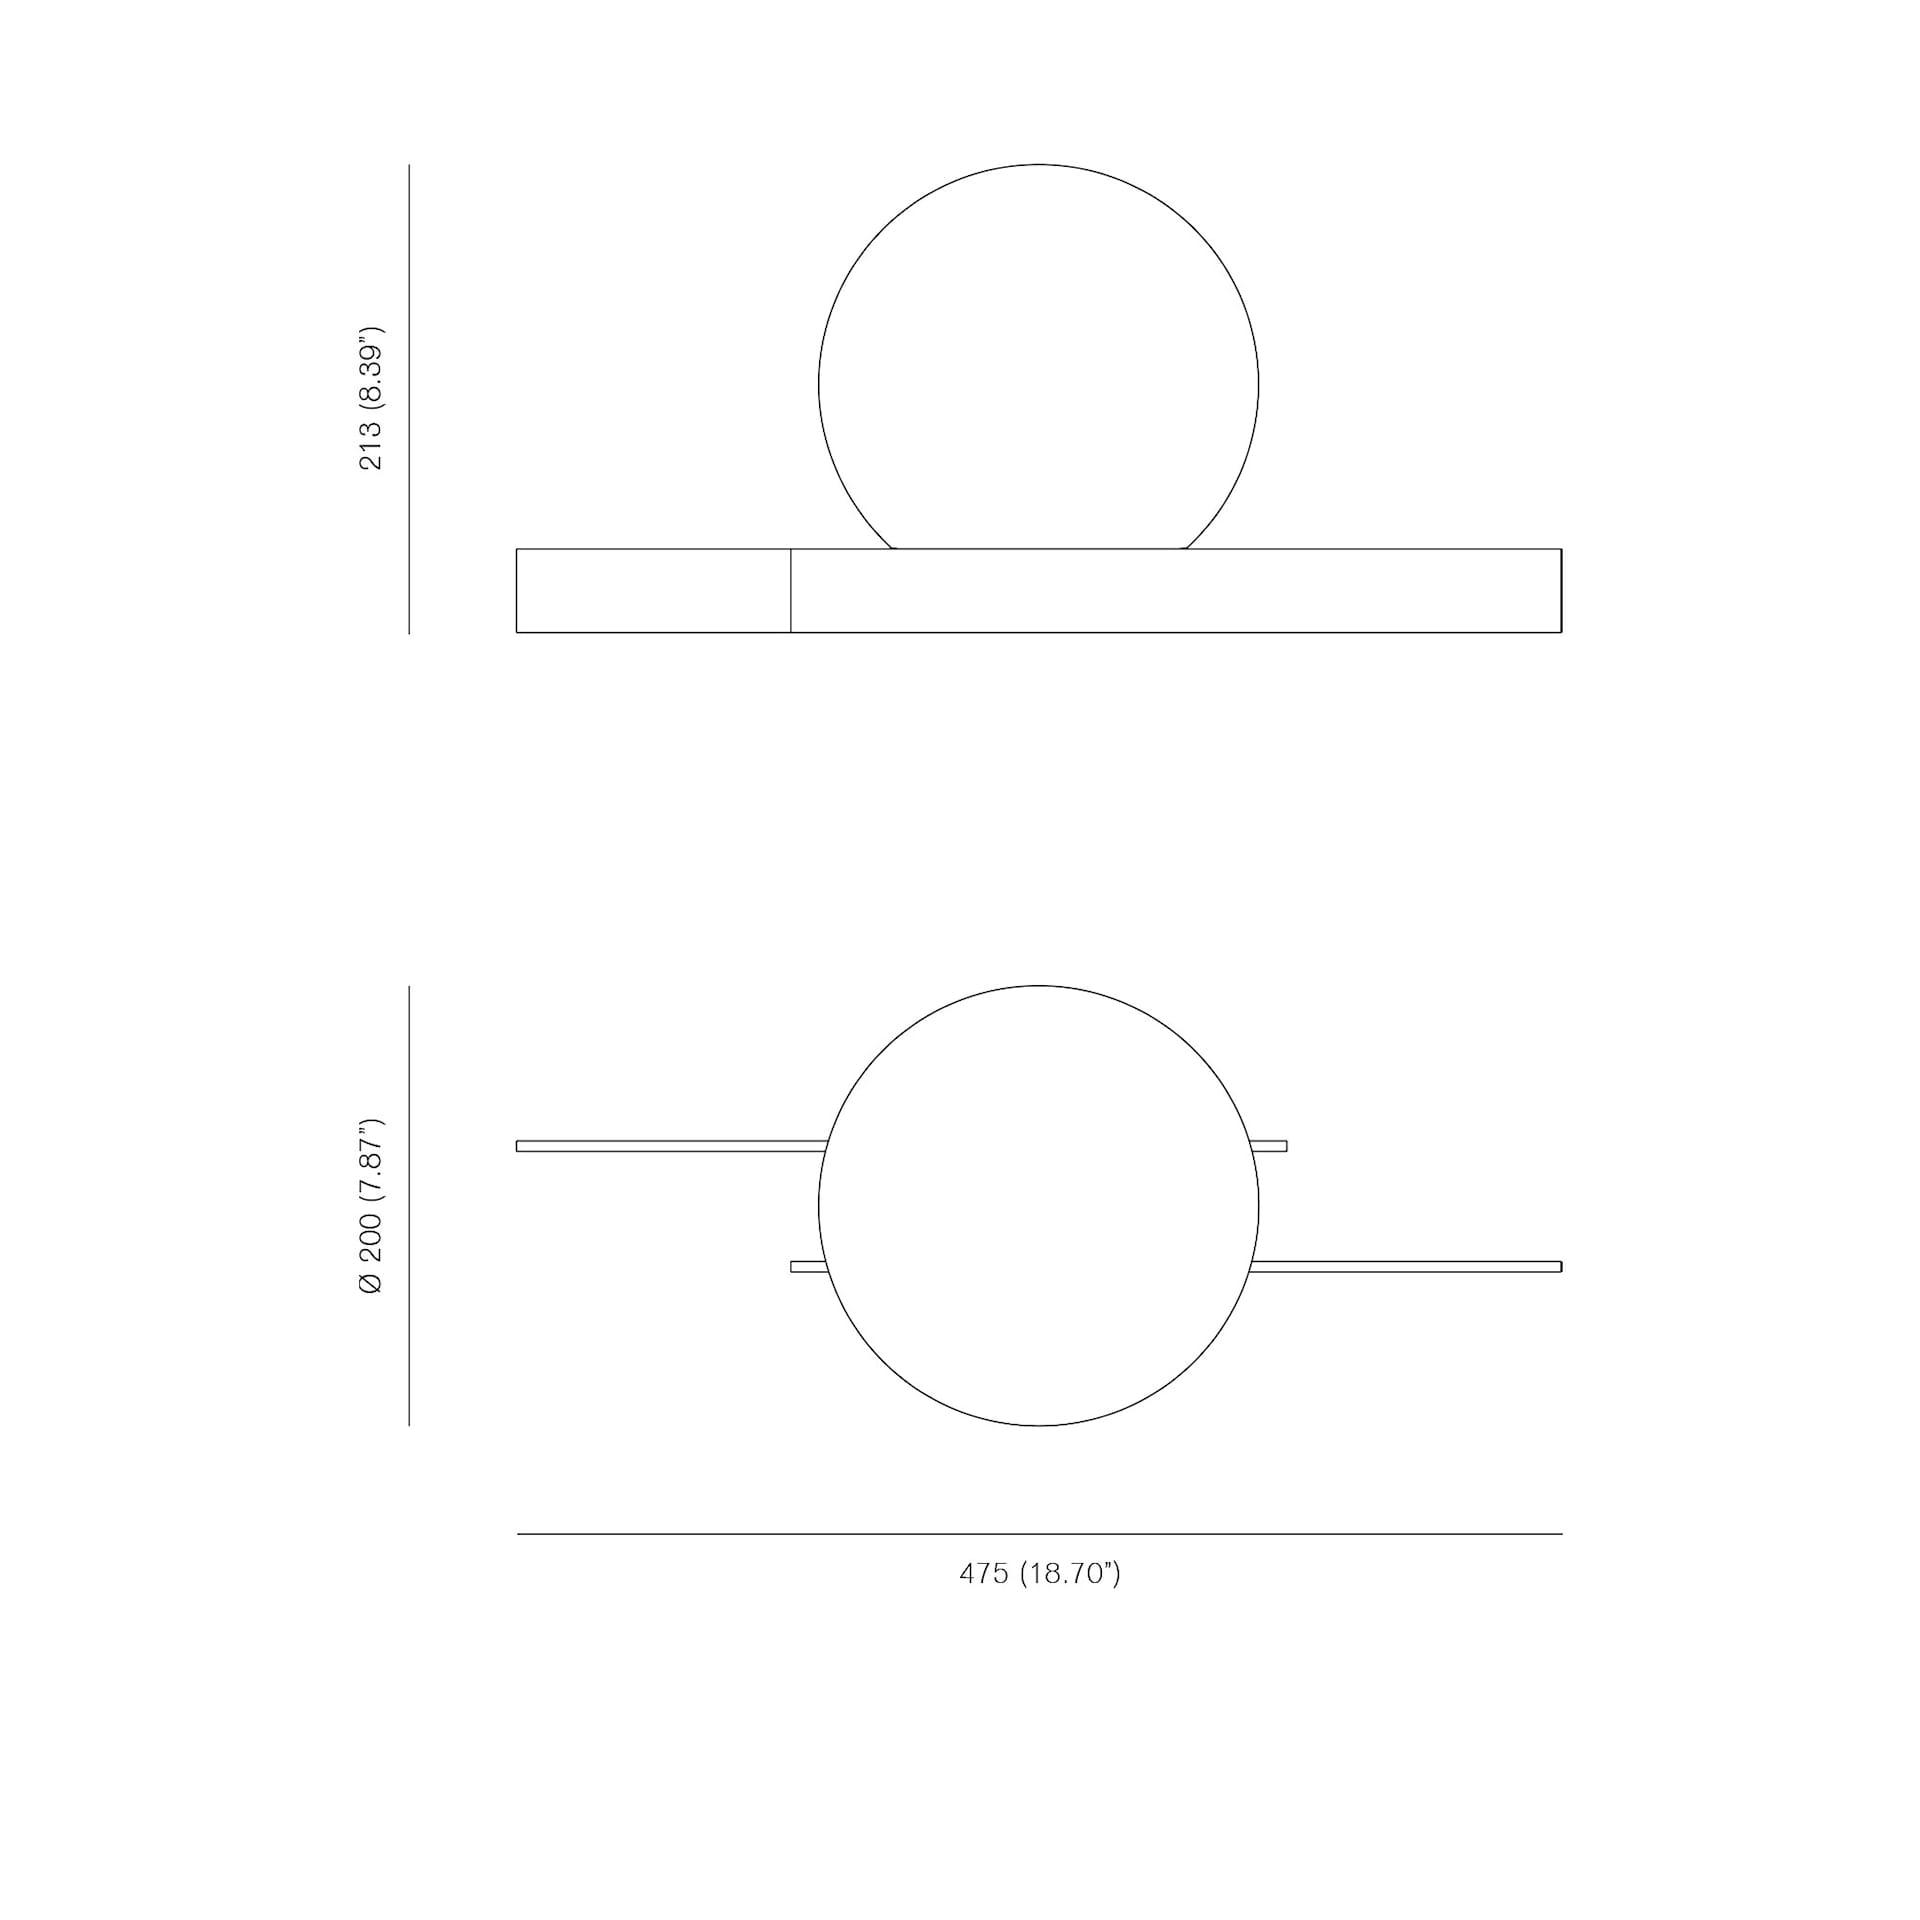 Somewhere In The Middle - Michael Anastassiades - Michael Anastassiades - NO GA